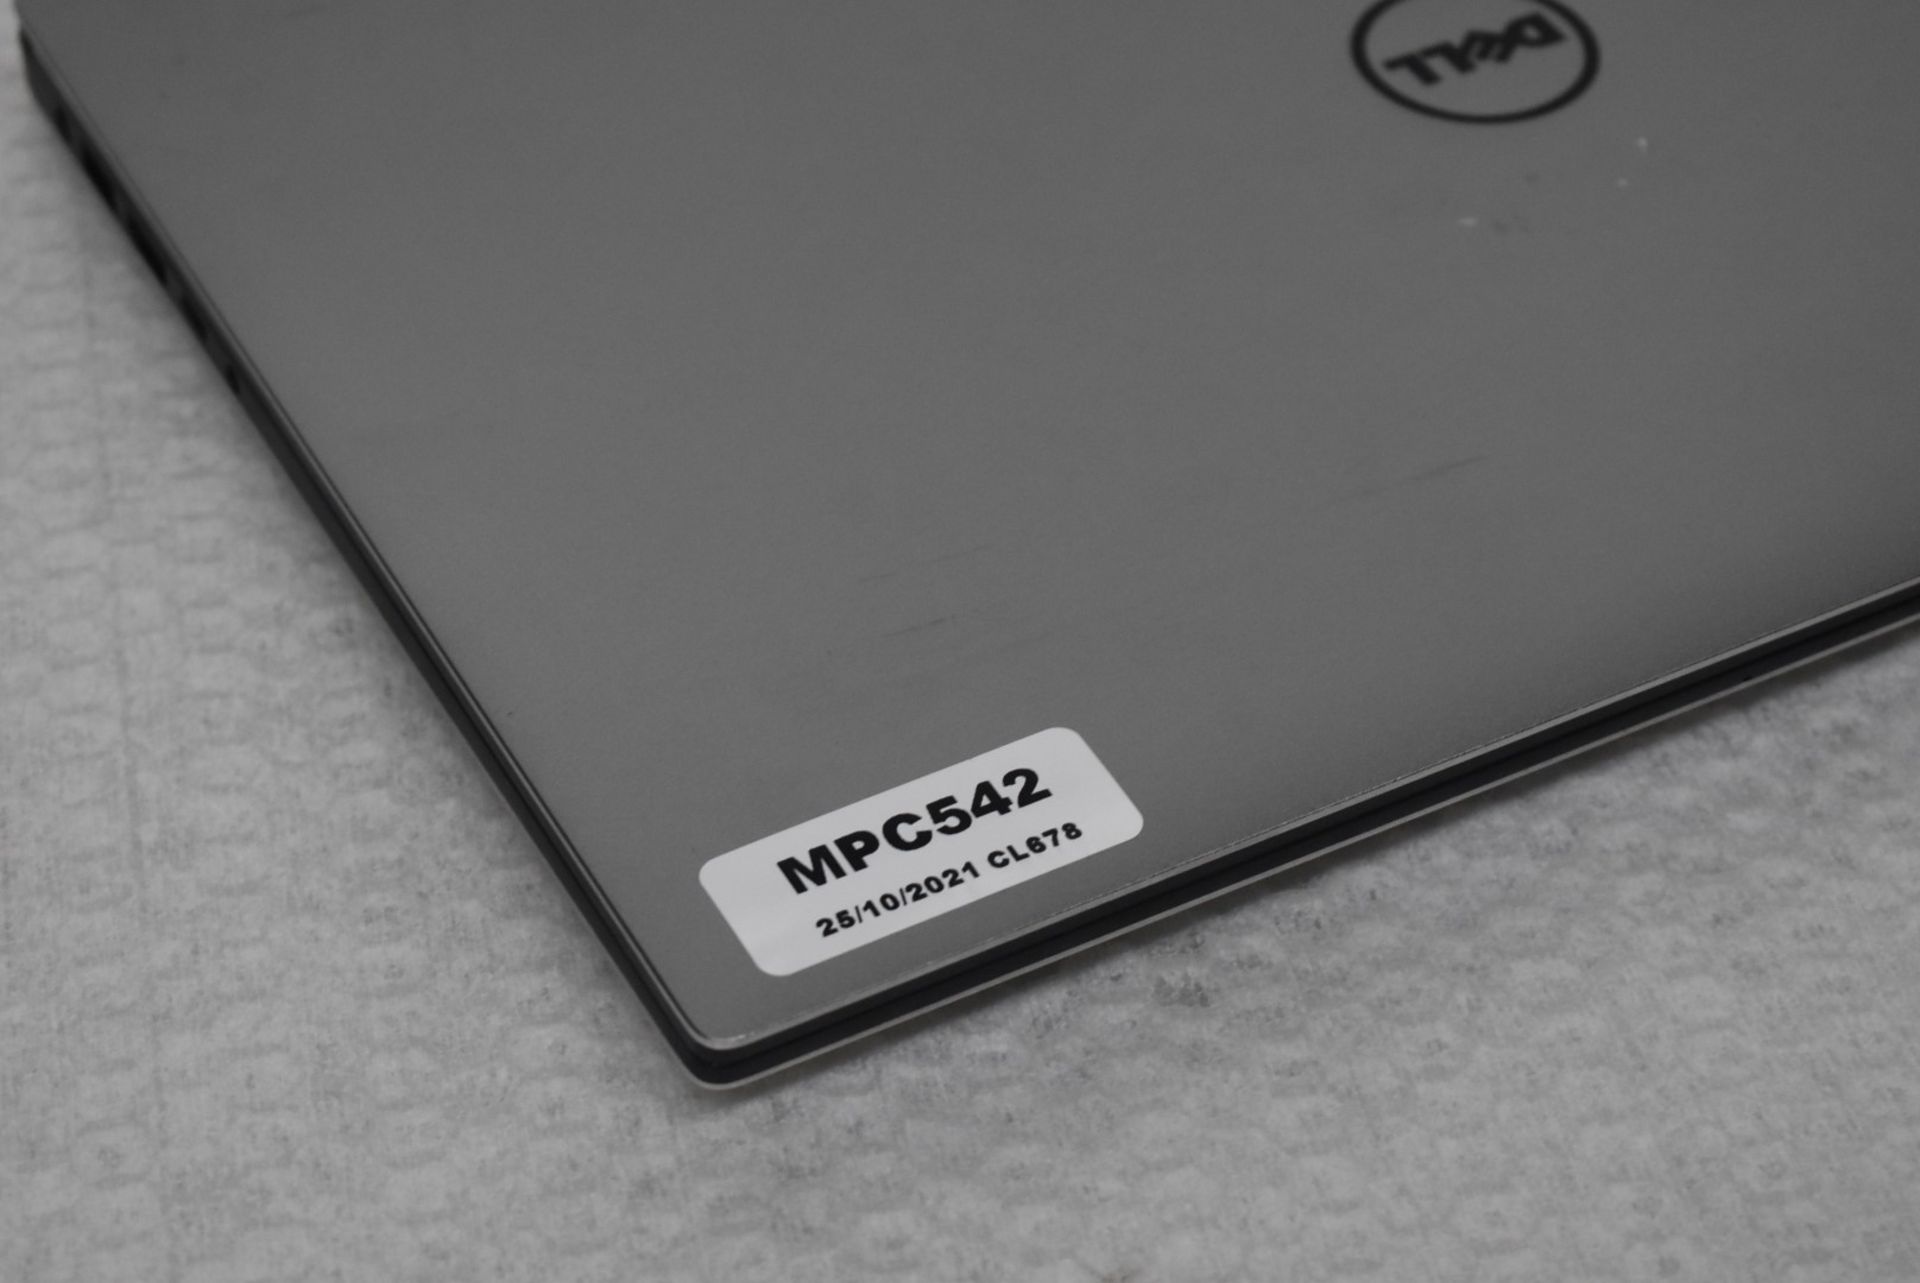 1 x Dell XPS 15 9570 15.6" Full HD Laptop Featuring an Intel i7-7700hq 3.8ghz Quad Core Processor, - Image 16 of 17